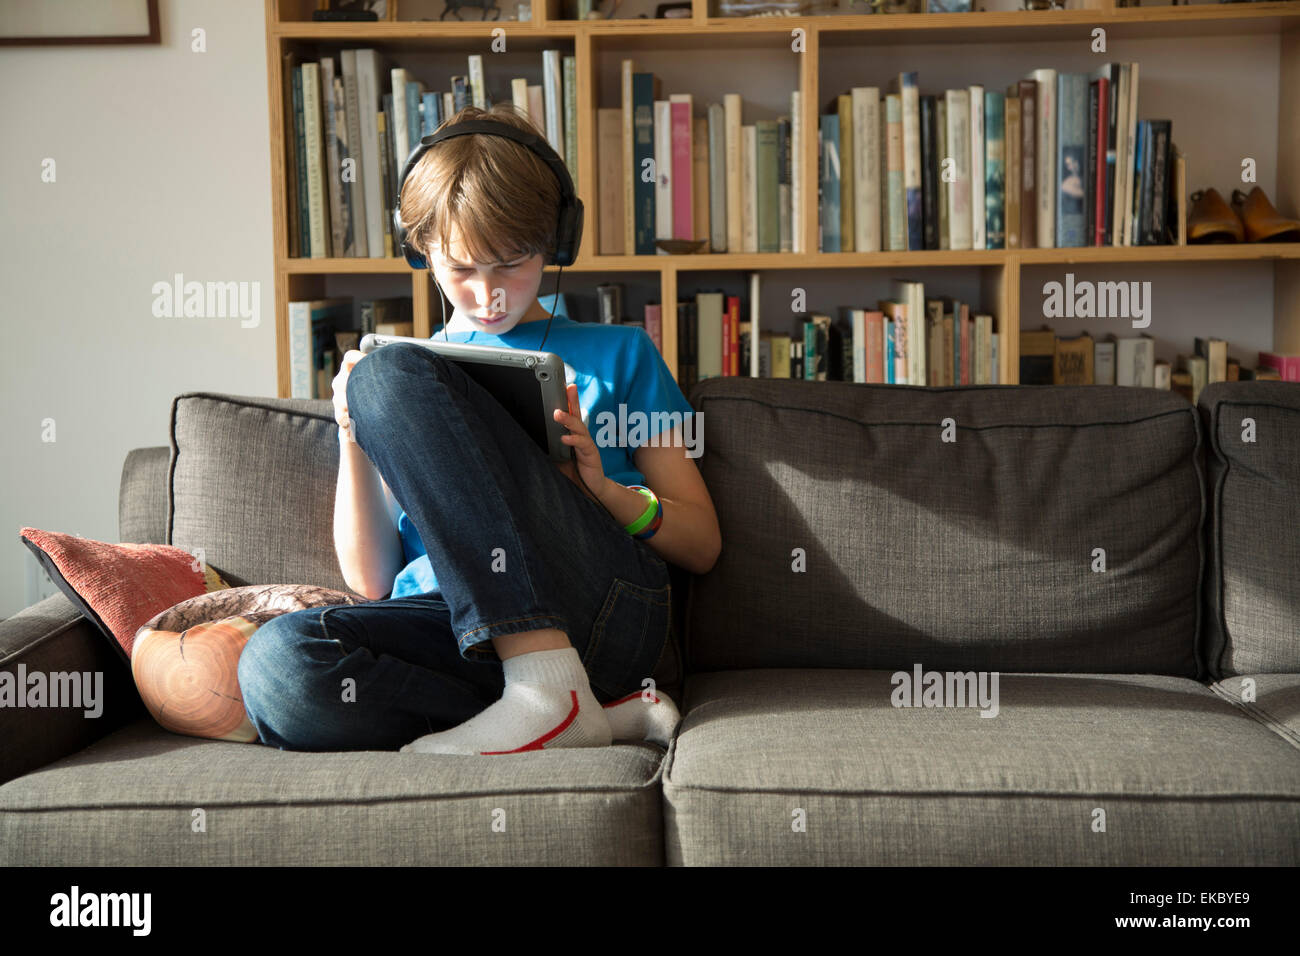 Boy listening to music on headphones and using digital tablet Stock Photo